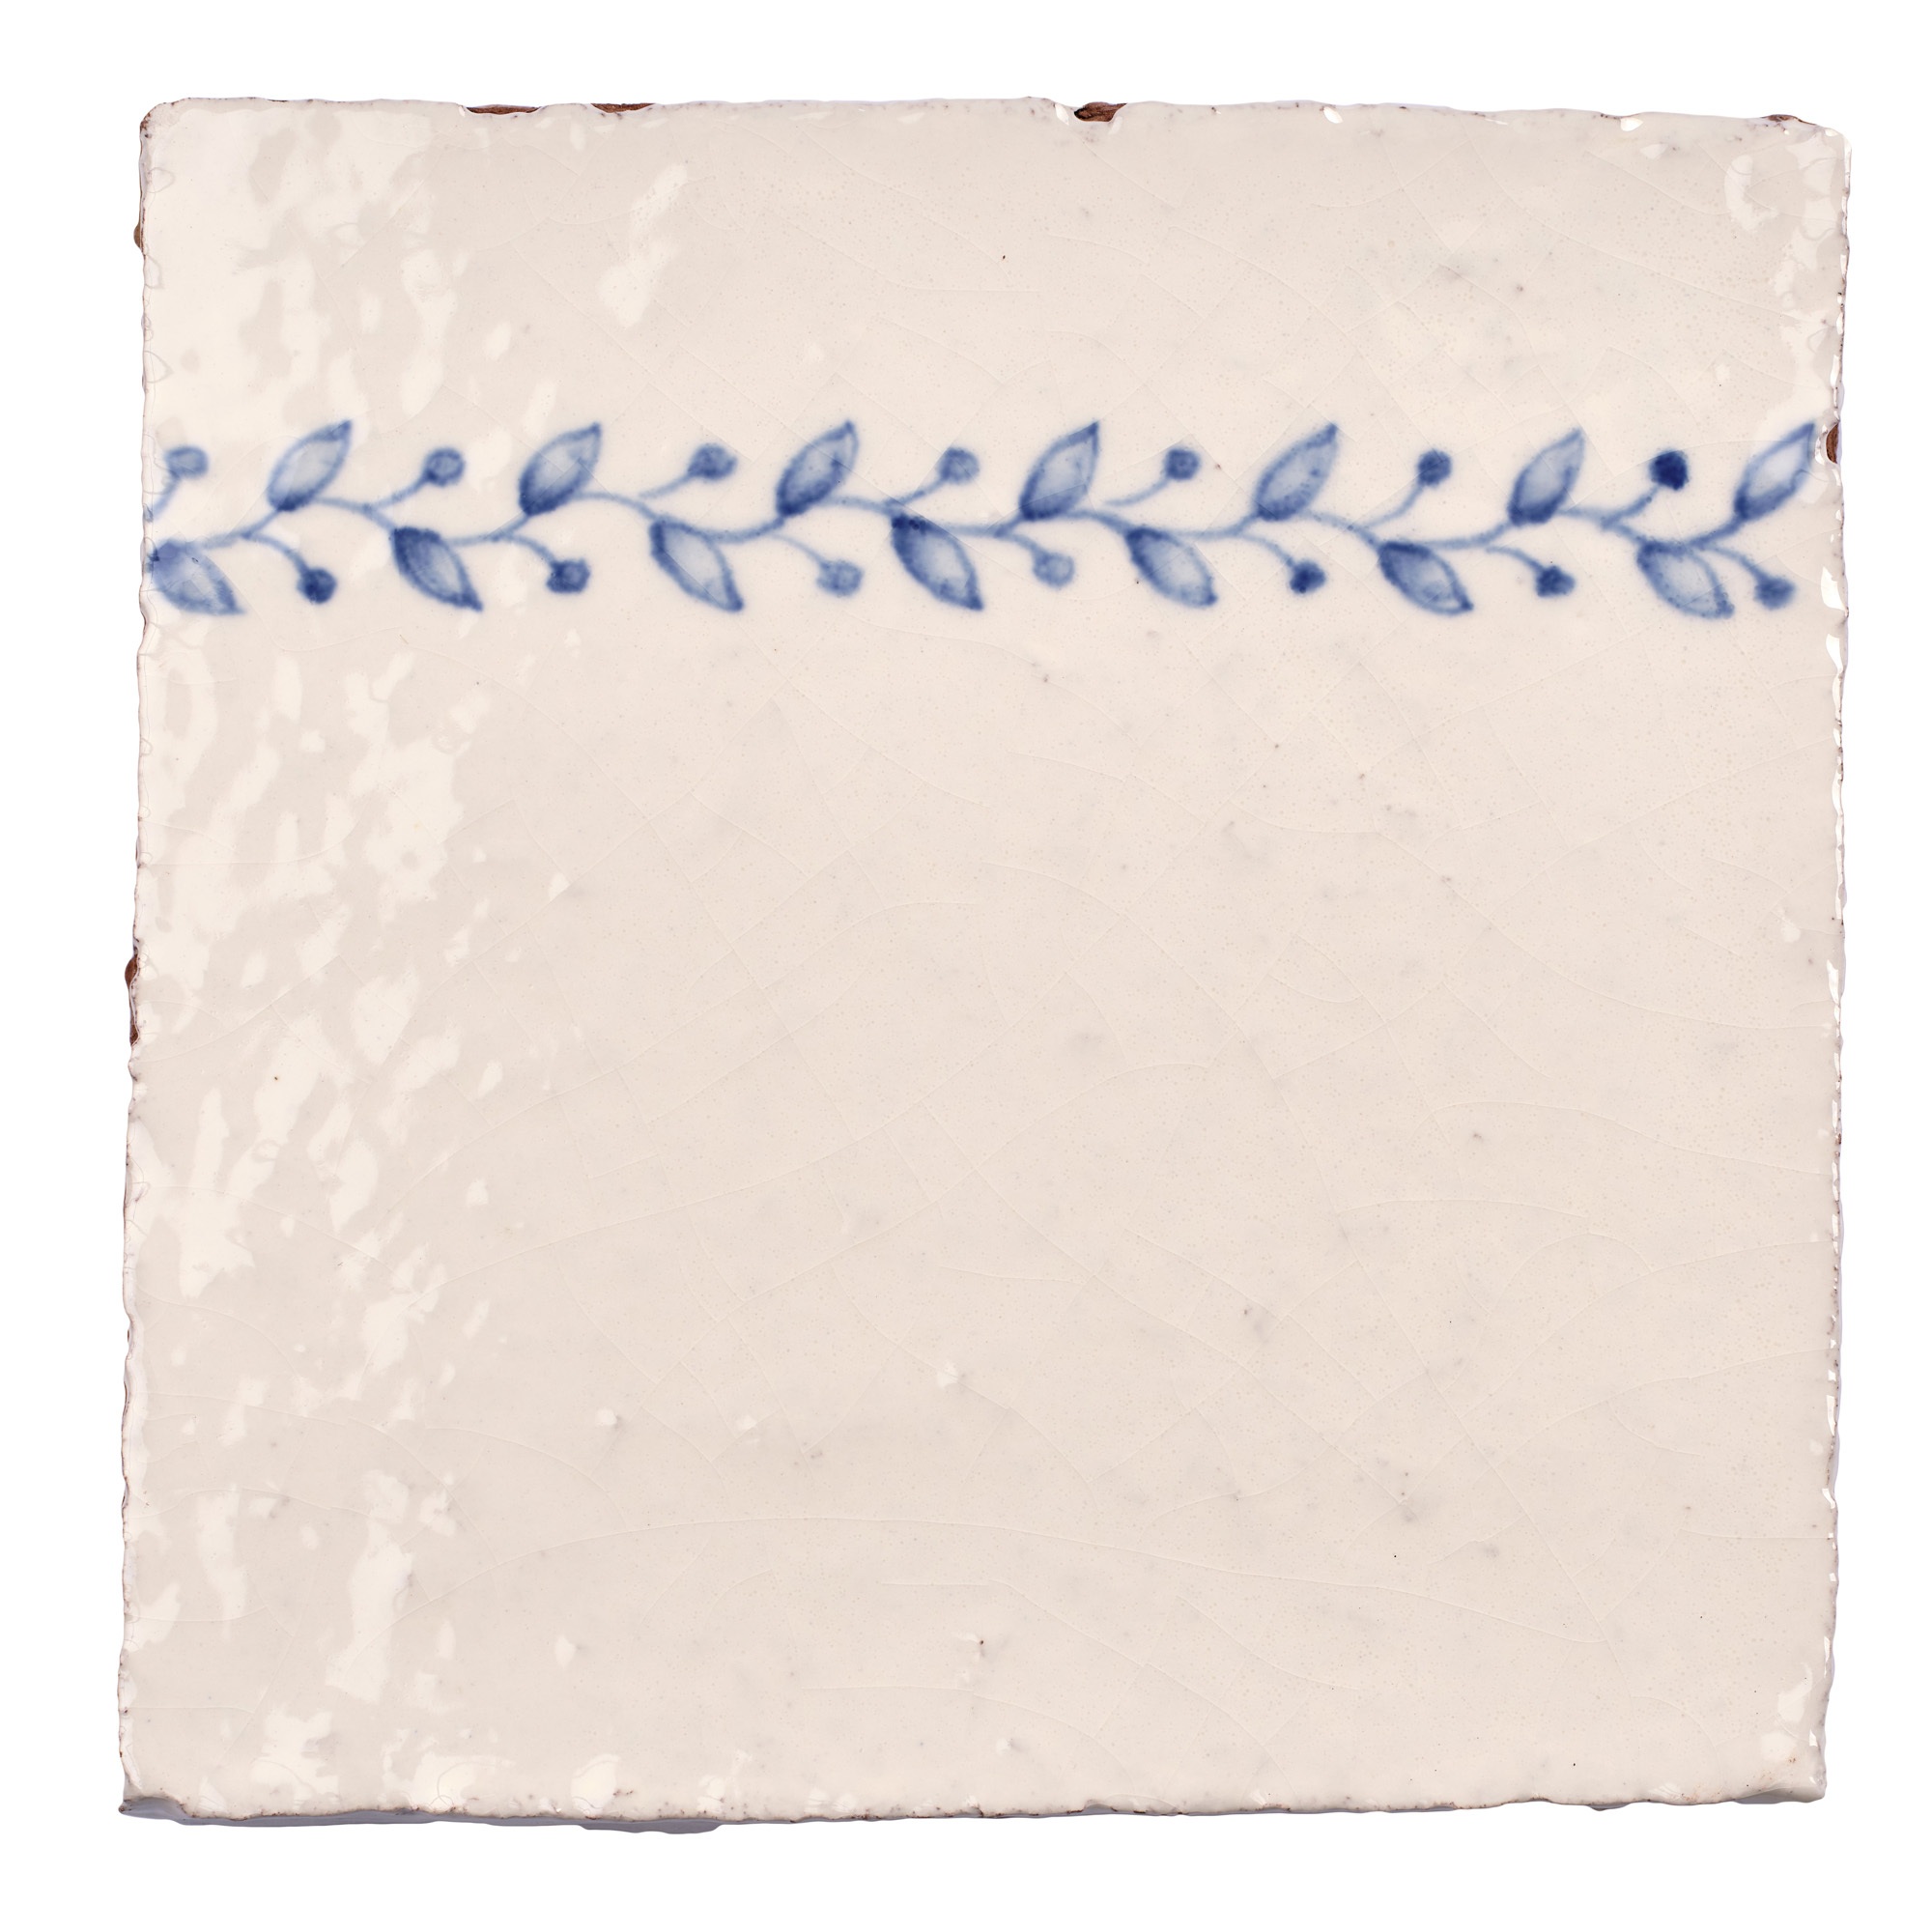 Wilding Border Square, product variant image